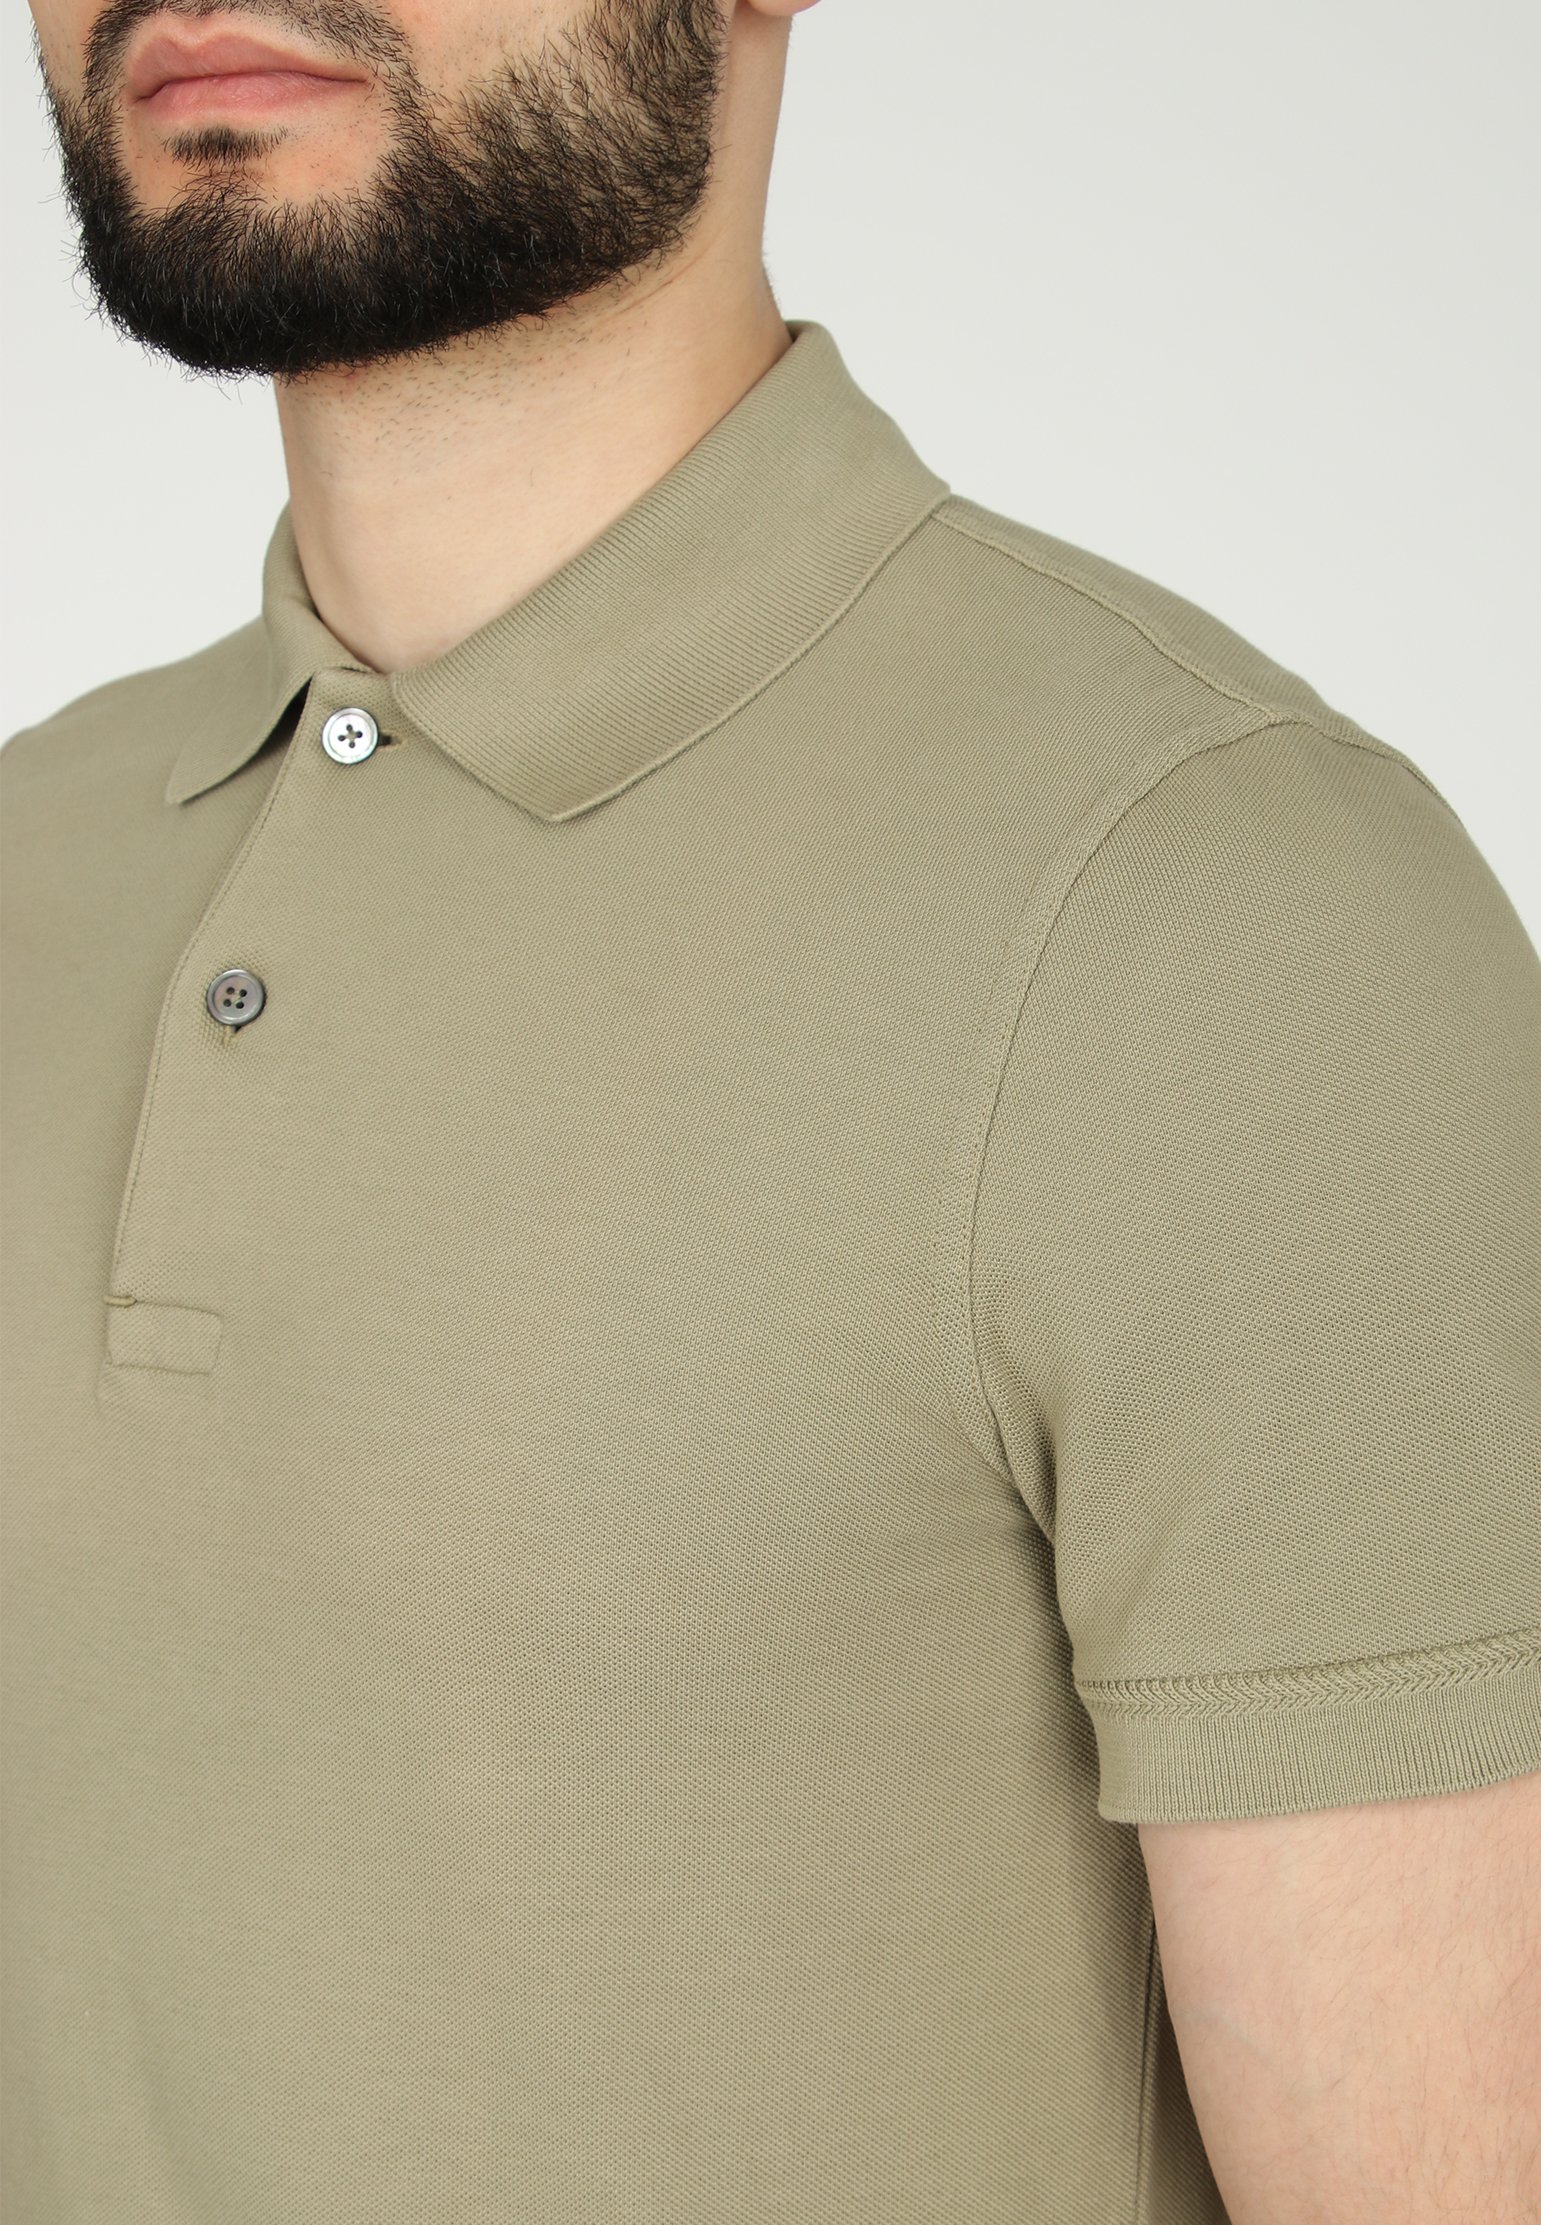 Polo TOM FORD Color: olive (Code: 1923) in online store Allure